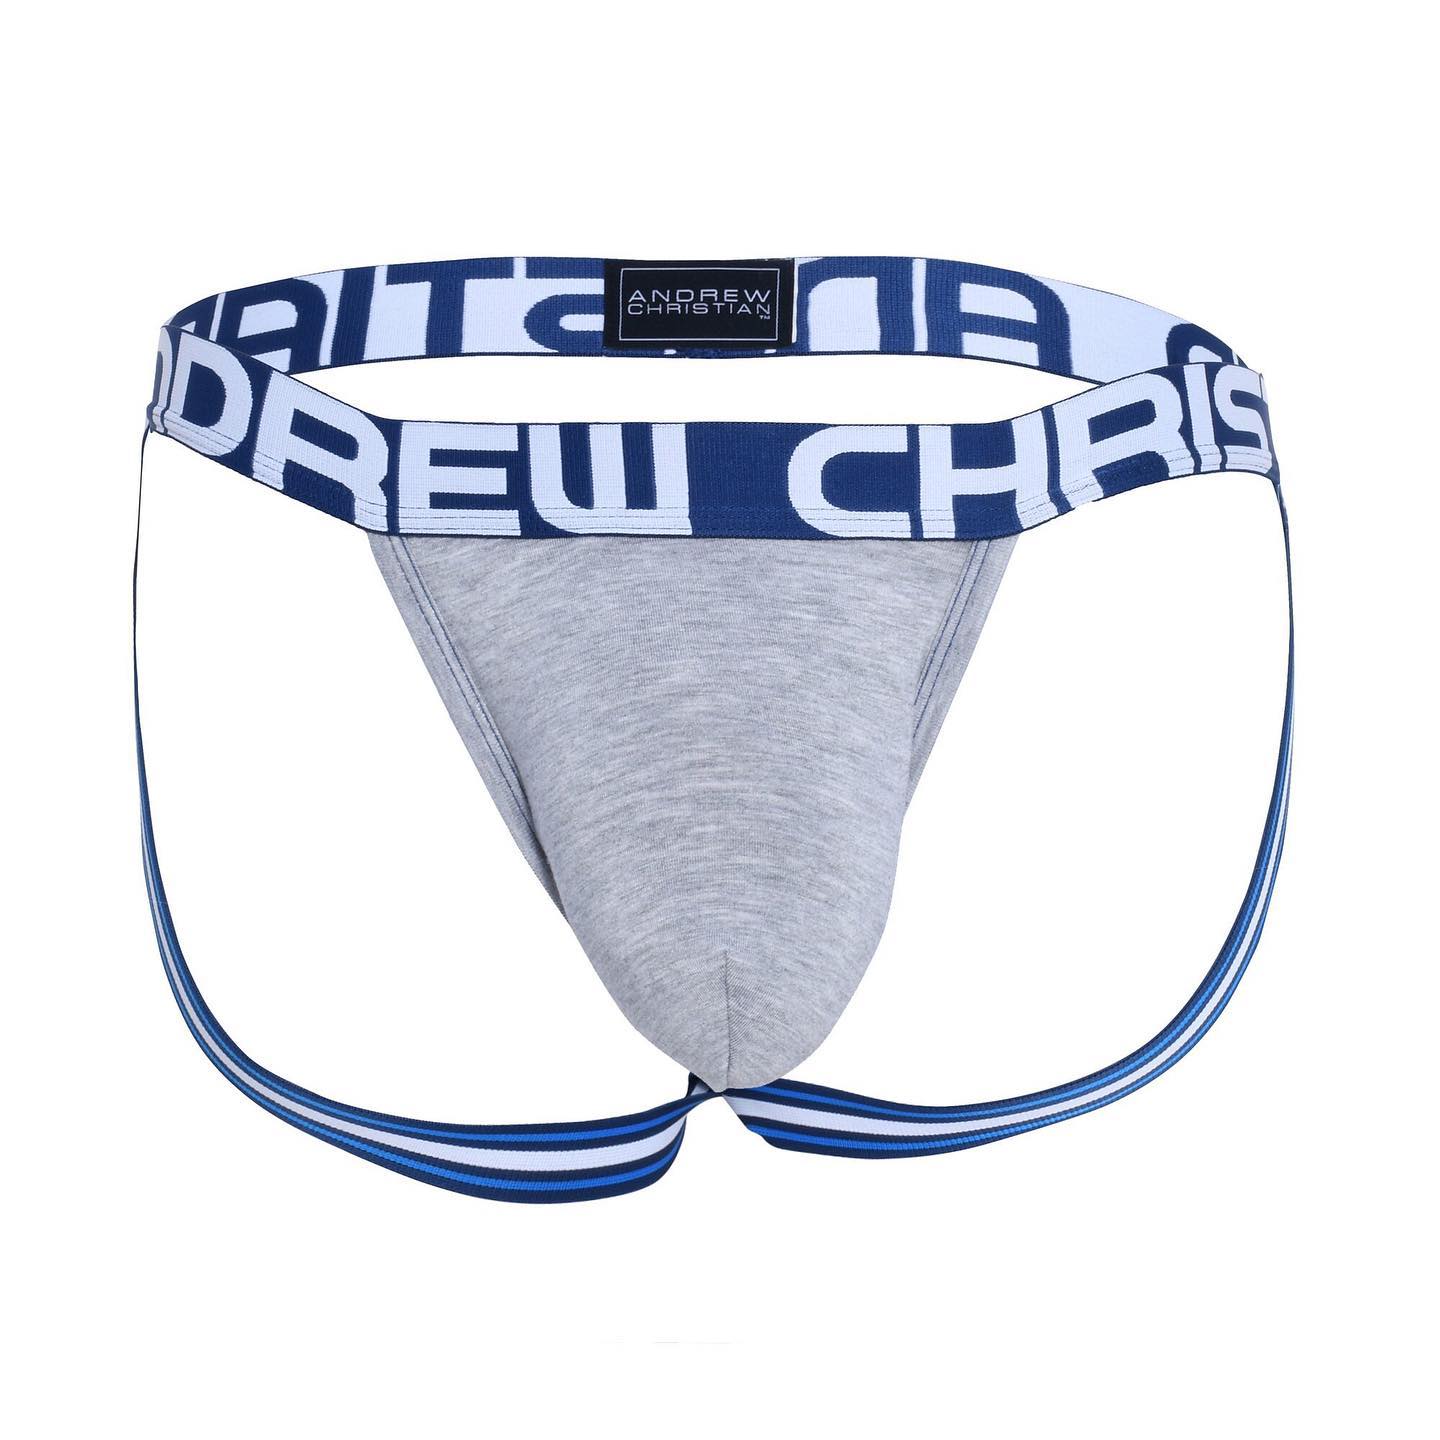 Comfort and support! With the Andrew Christian Almost Naked Bamboo Jock you’ll feel like you are wearing nothing at all! A truly enjoyable underwear experience:
____
https://menandunderwear.com/shop/underwear/andrew-christian-almost-naked-bamboo-jock-heather-grey